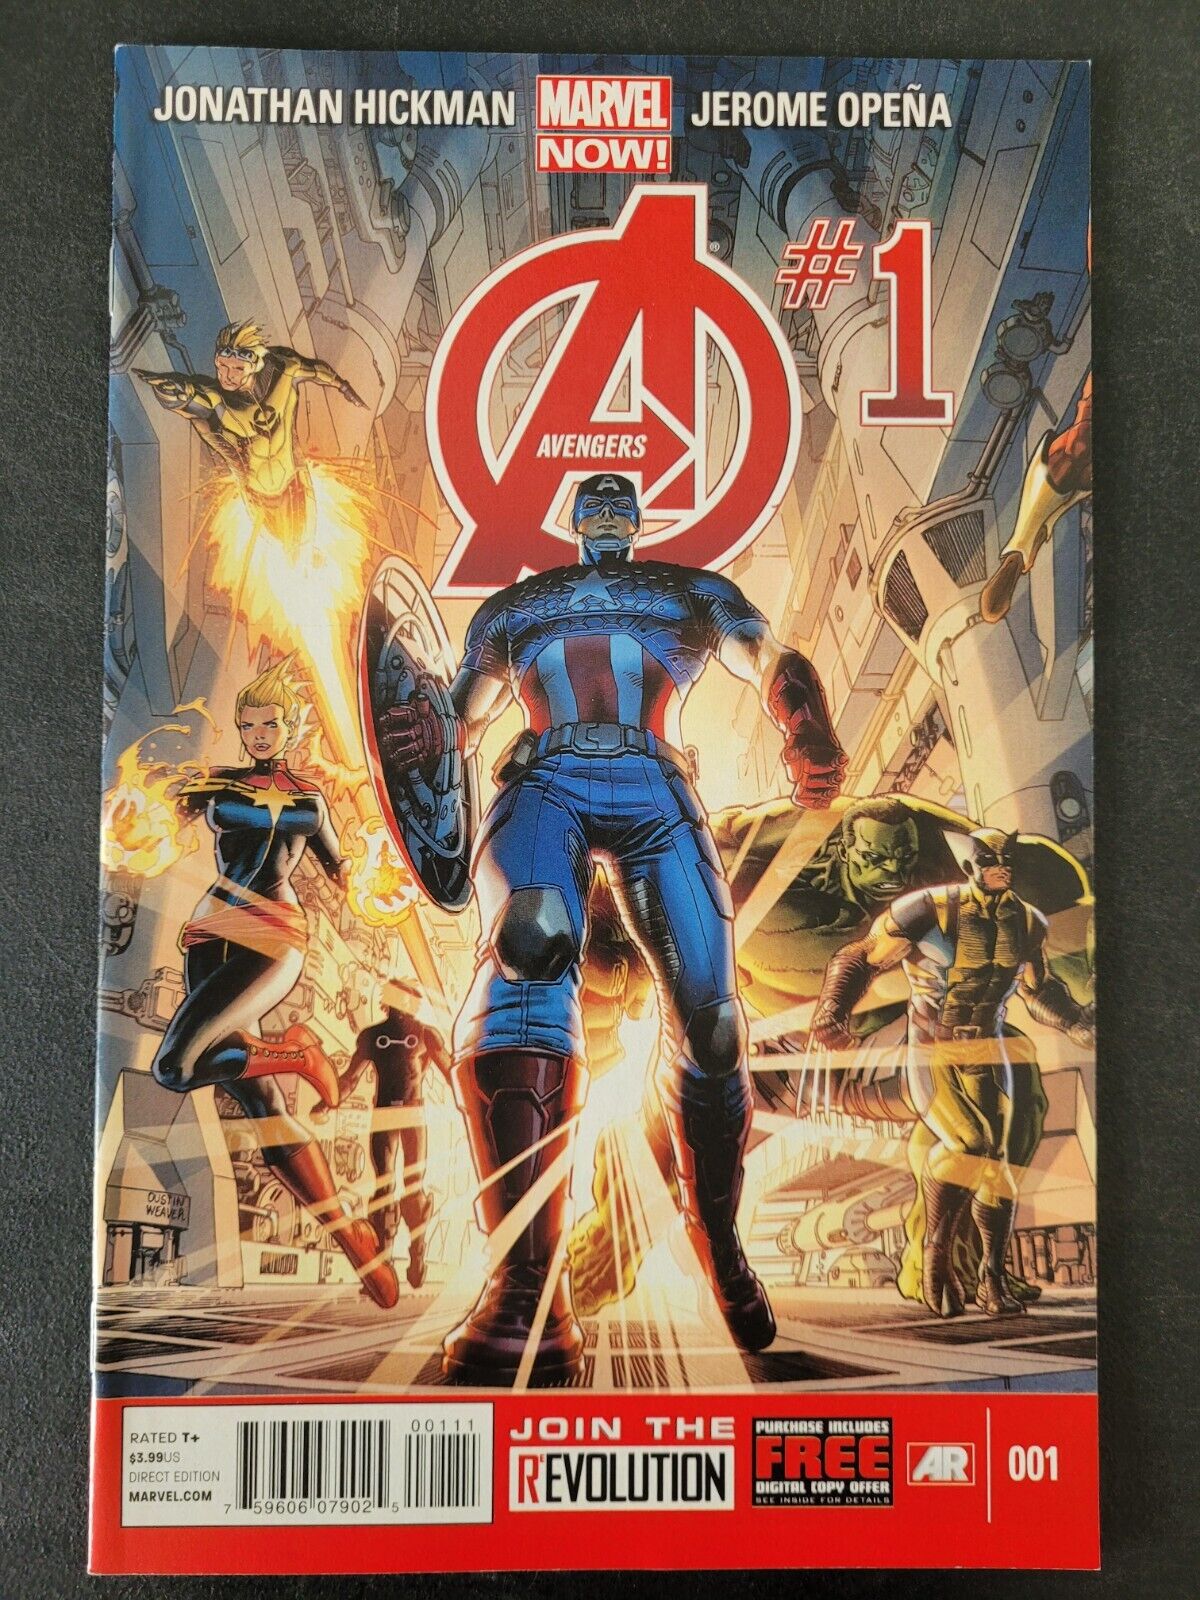 AVENGERS #1 (2013) MARVEL NOW COMICS 1ST APPEARANCE OF ALEPH 1ST SMASHER